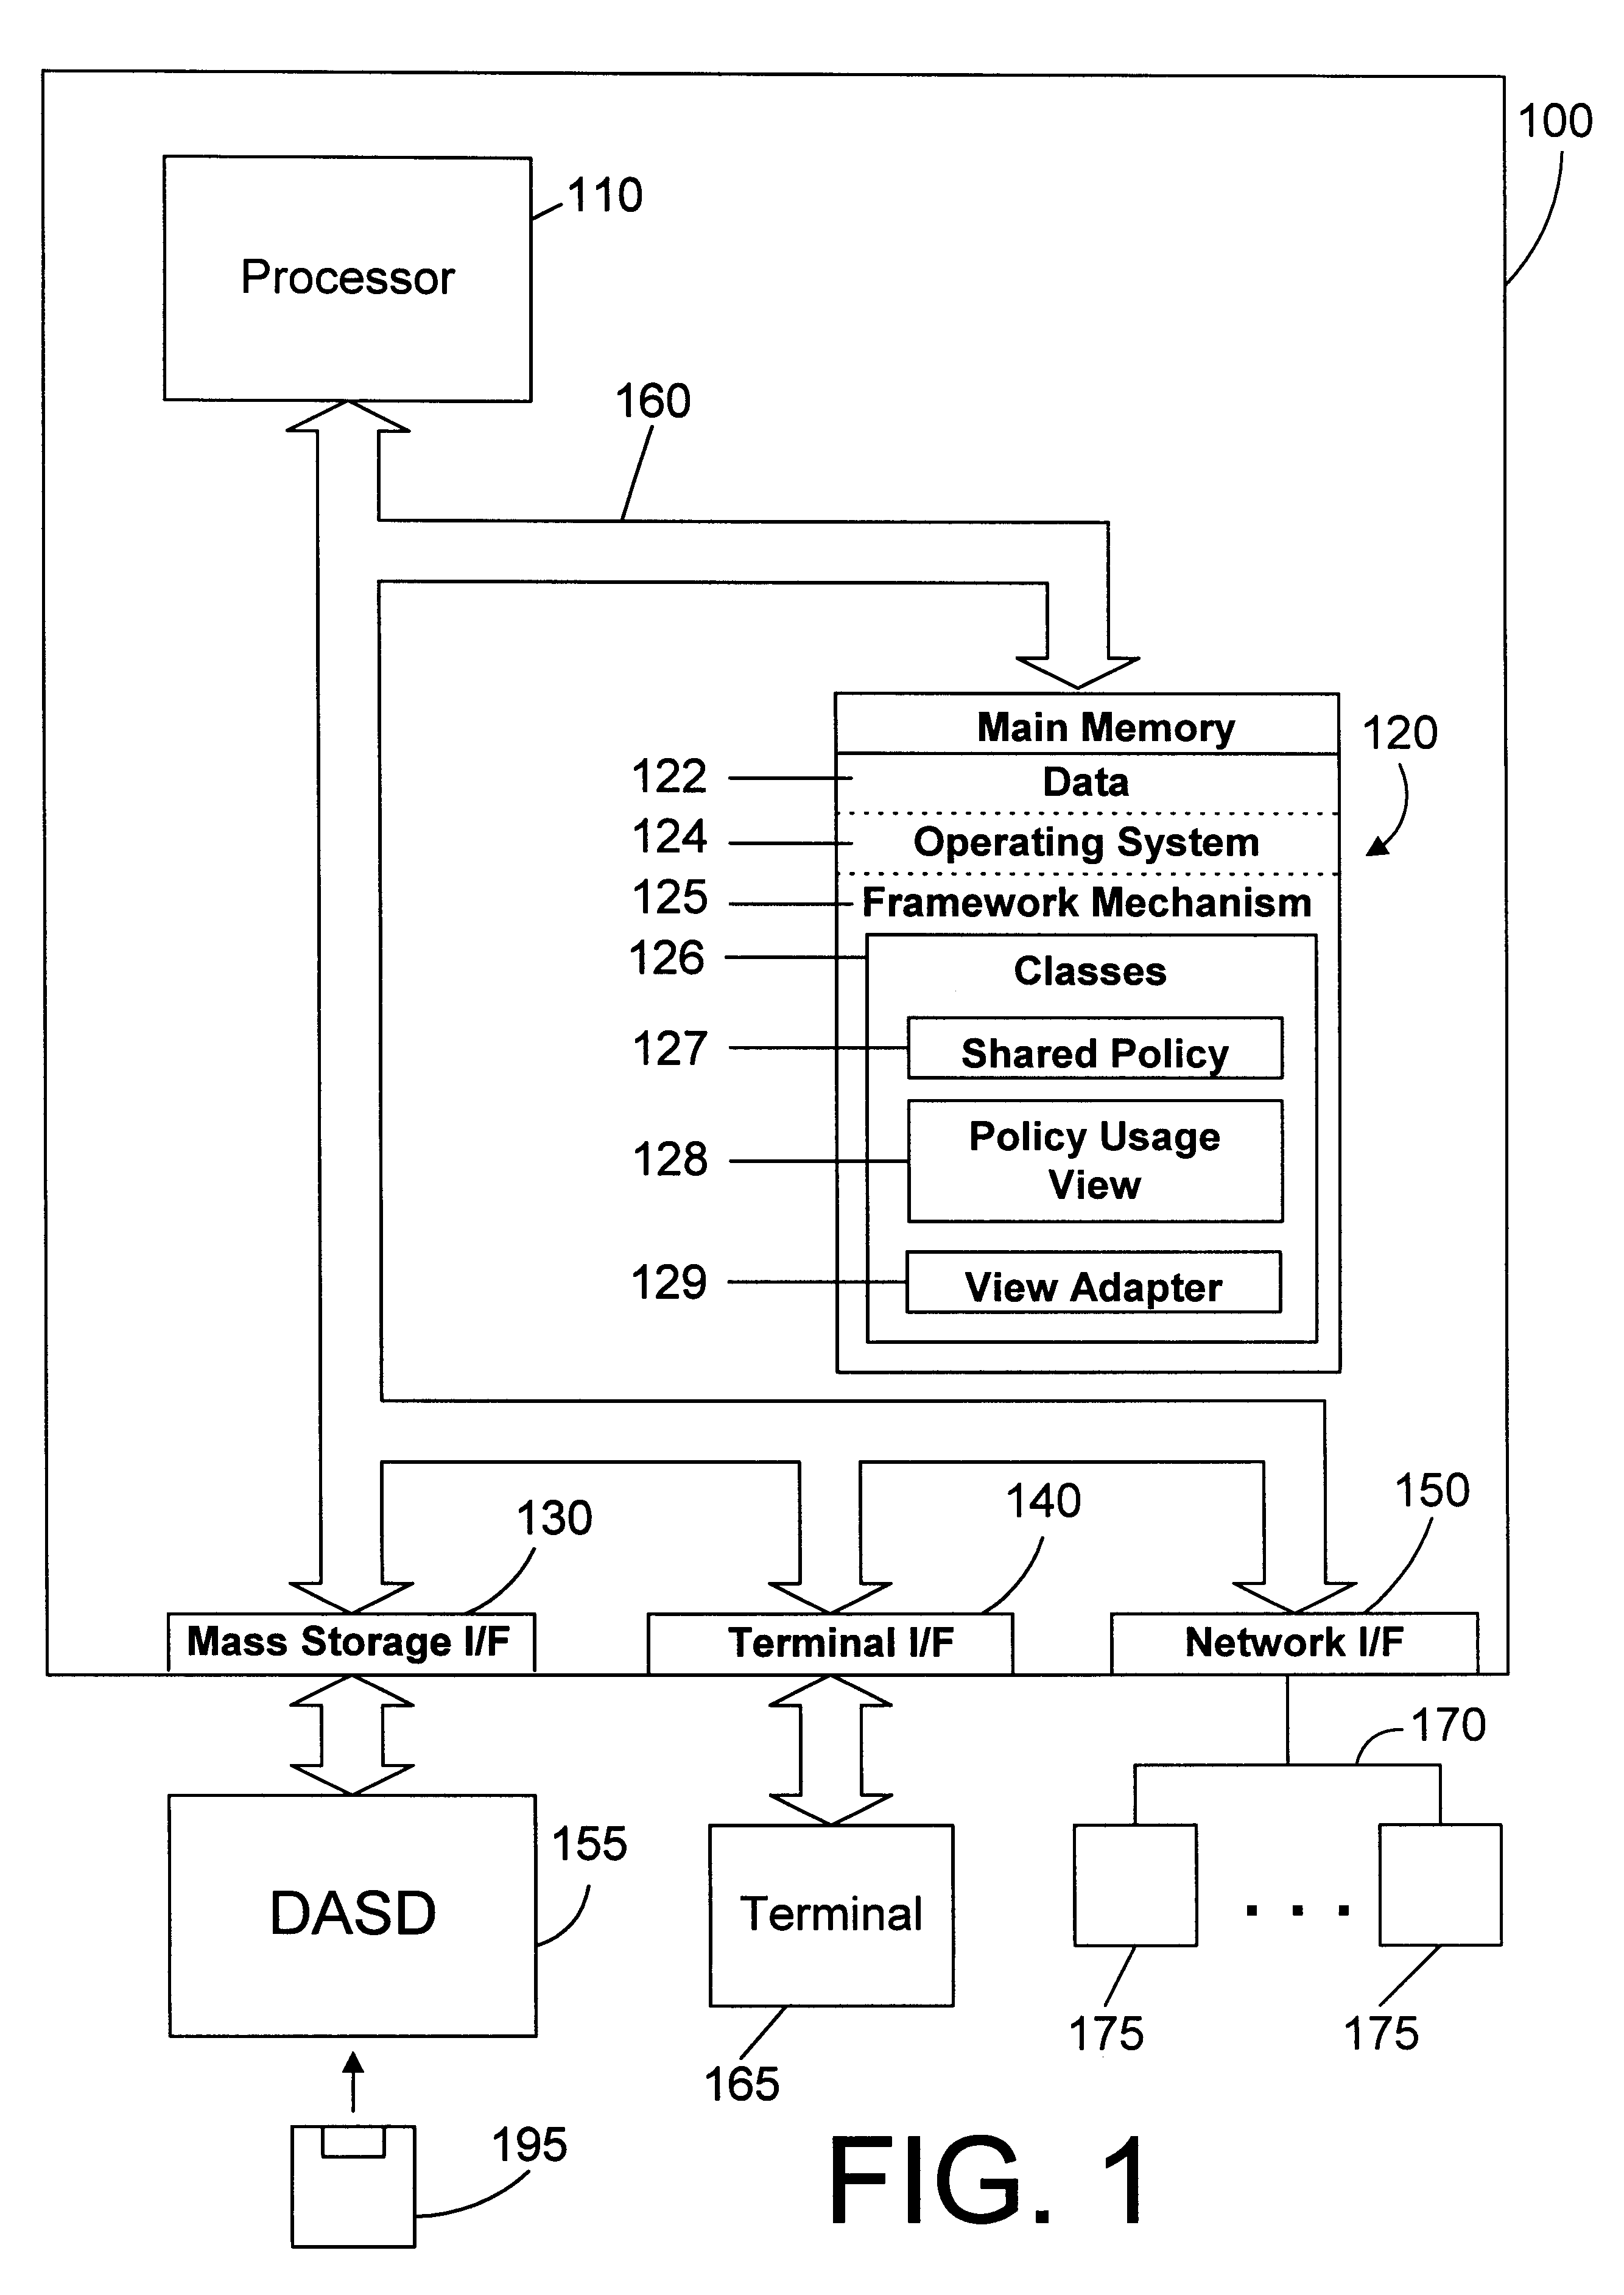 Apparatus and method for providing common behavior across different processing levels in an object oriented framework